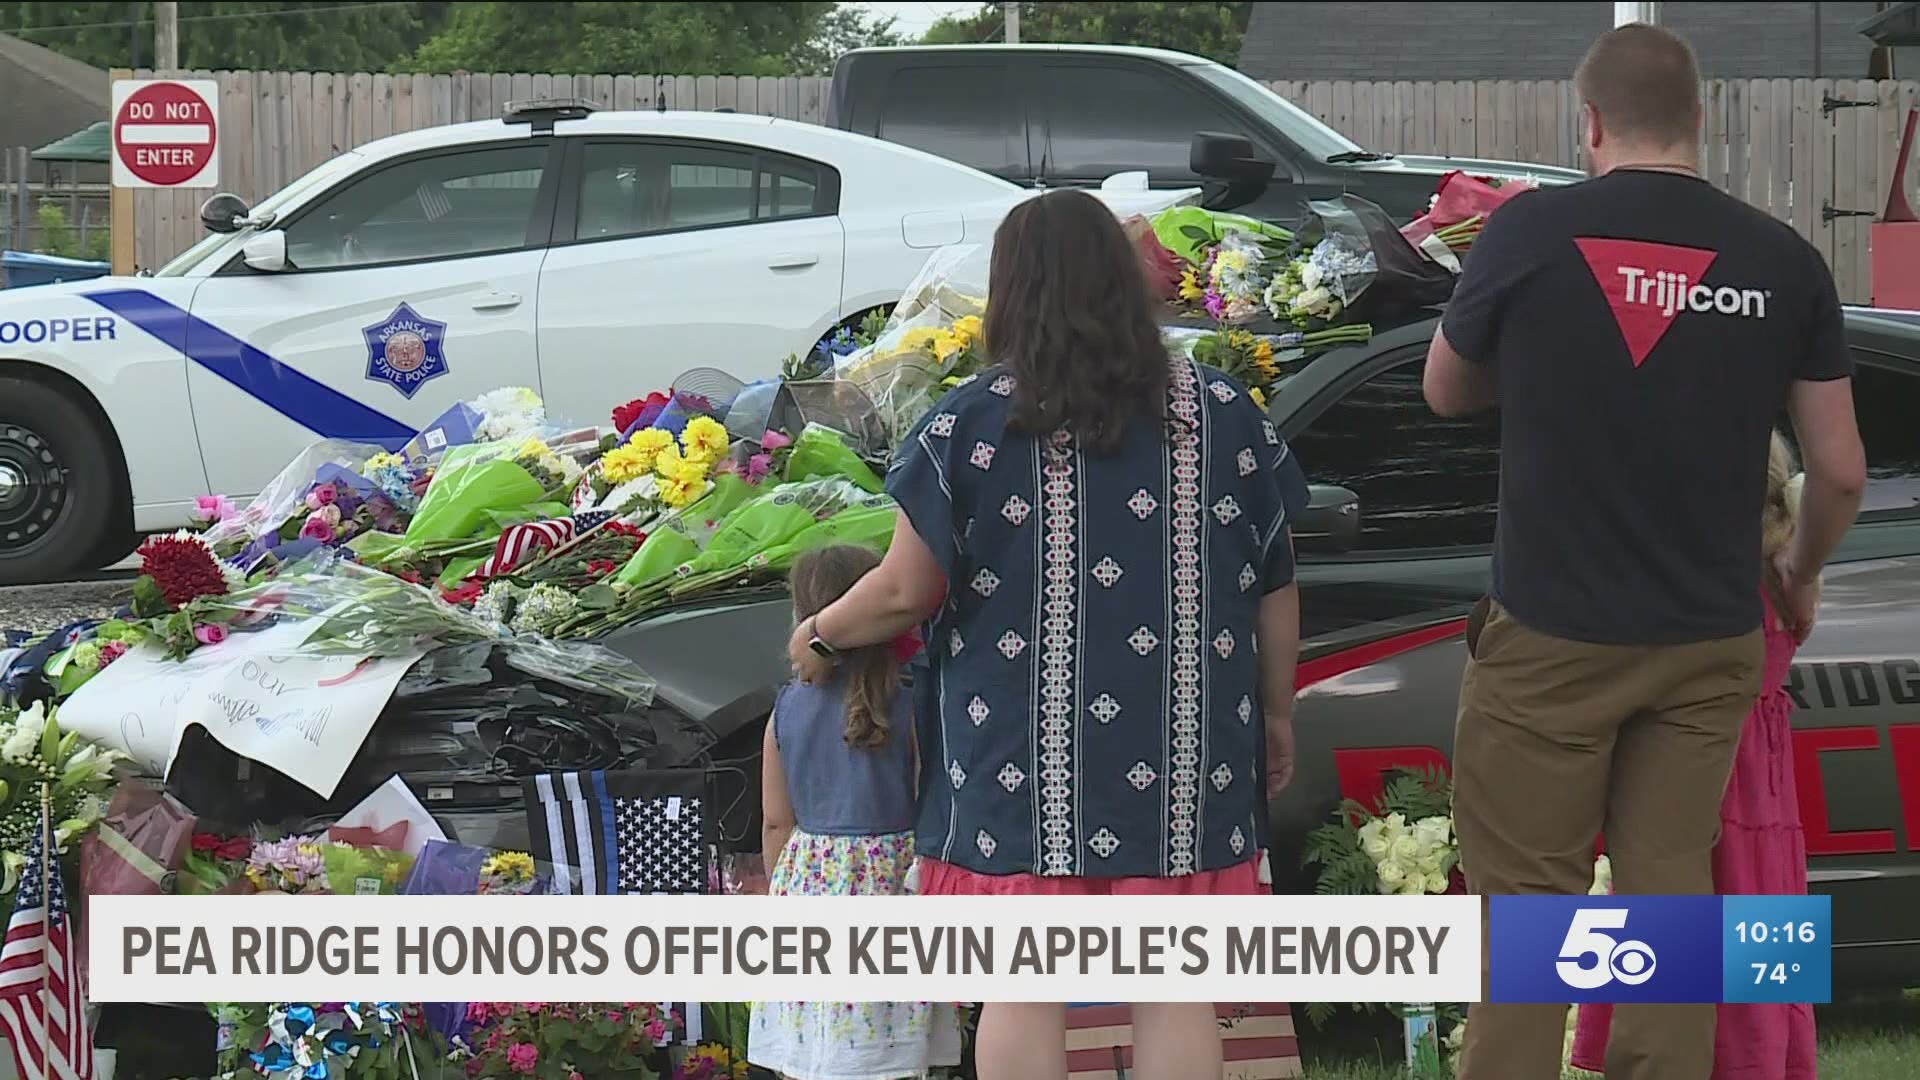 The small community of Pea Ridge continues to mourn the death of an officer killed while on duty.